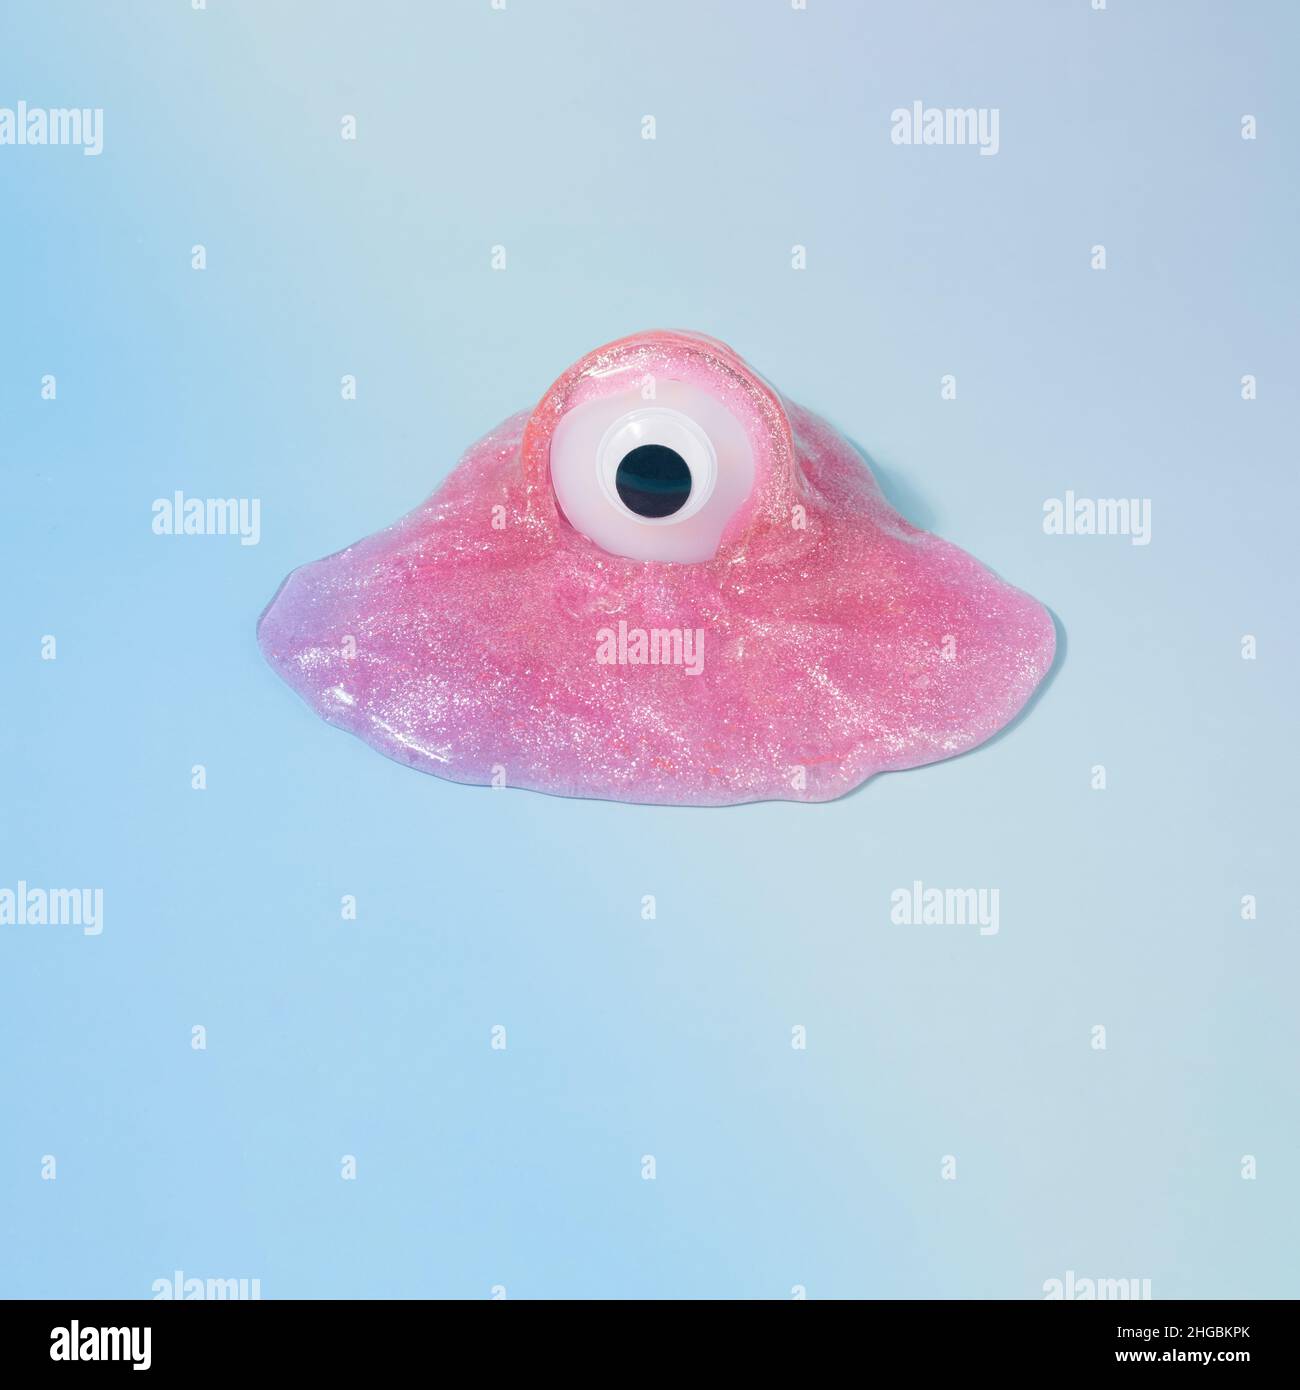 Monster figurine with one eye in a pink glitter slime on a gradient blue background. Flu virus funny concept. Stock Photo